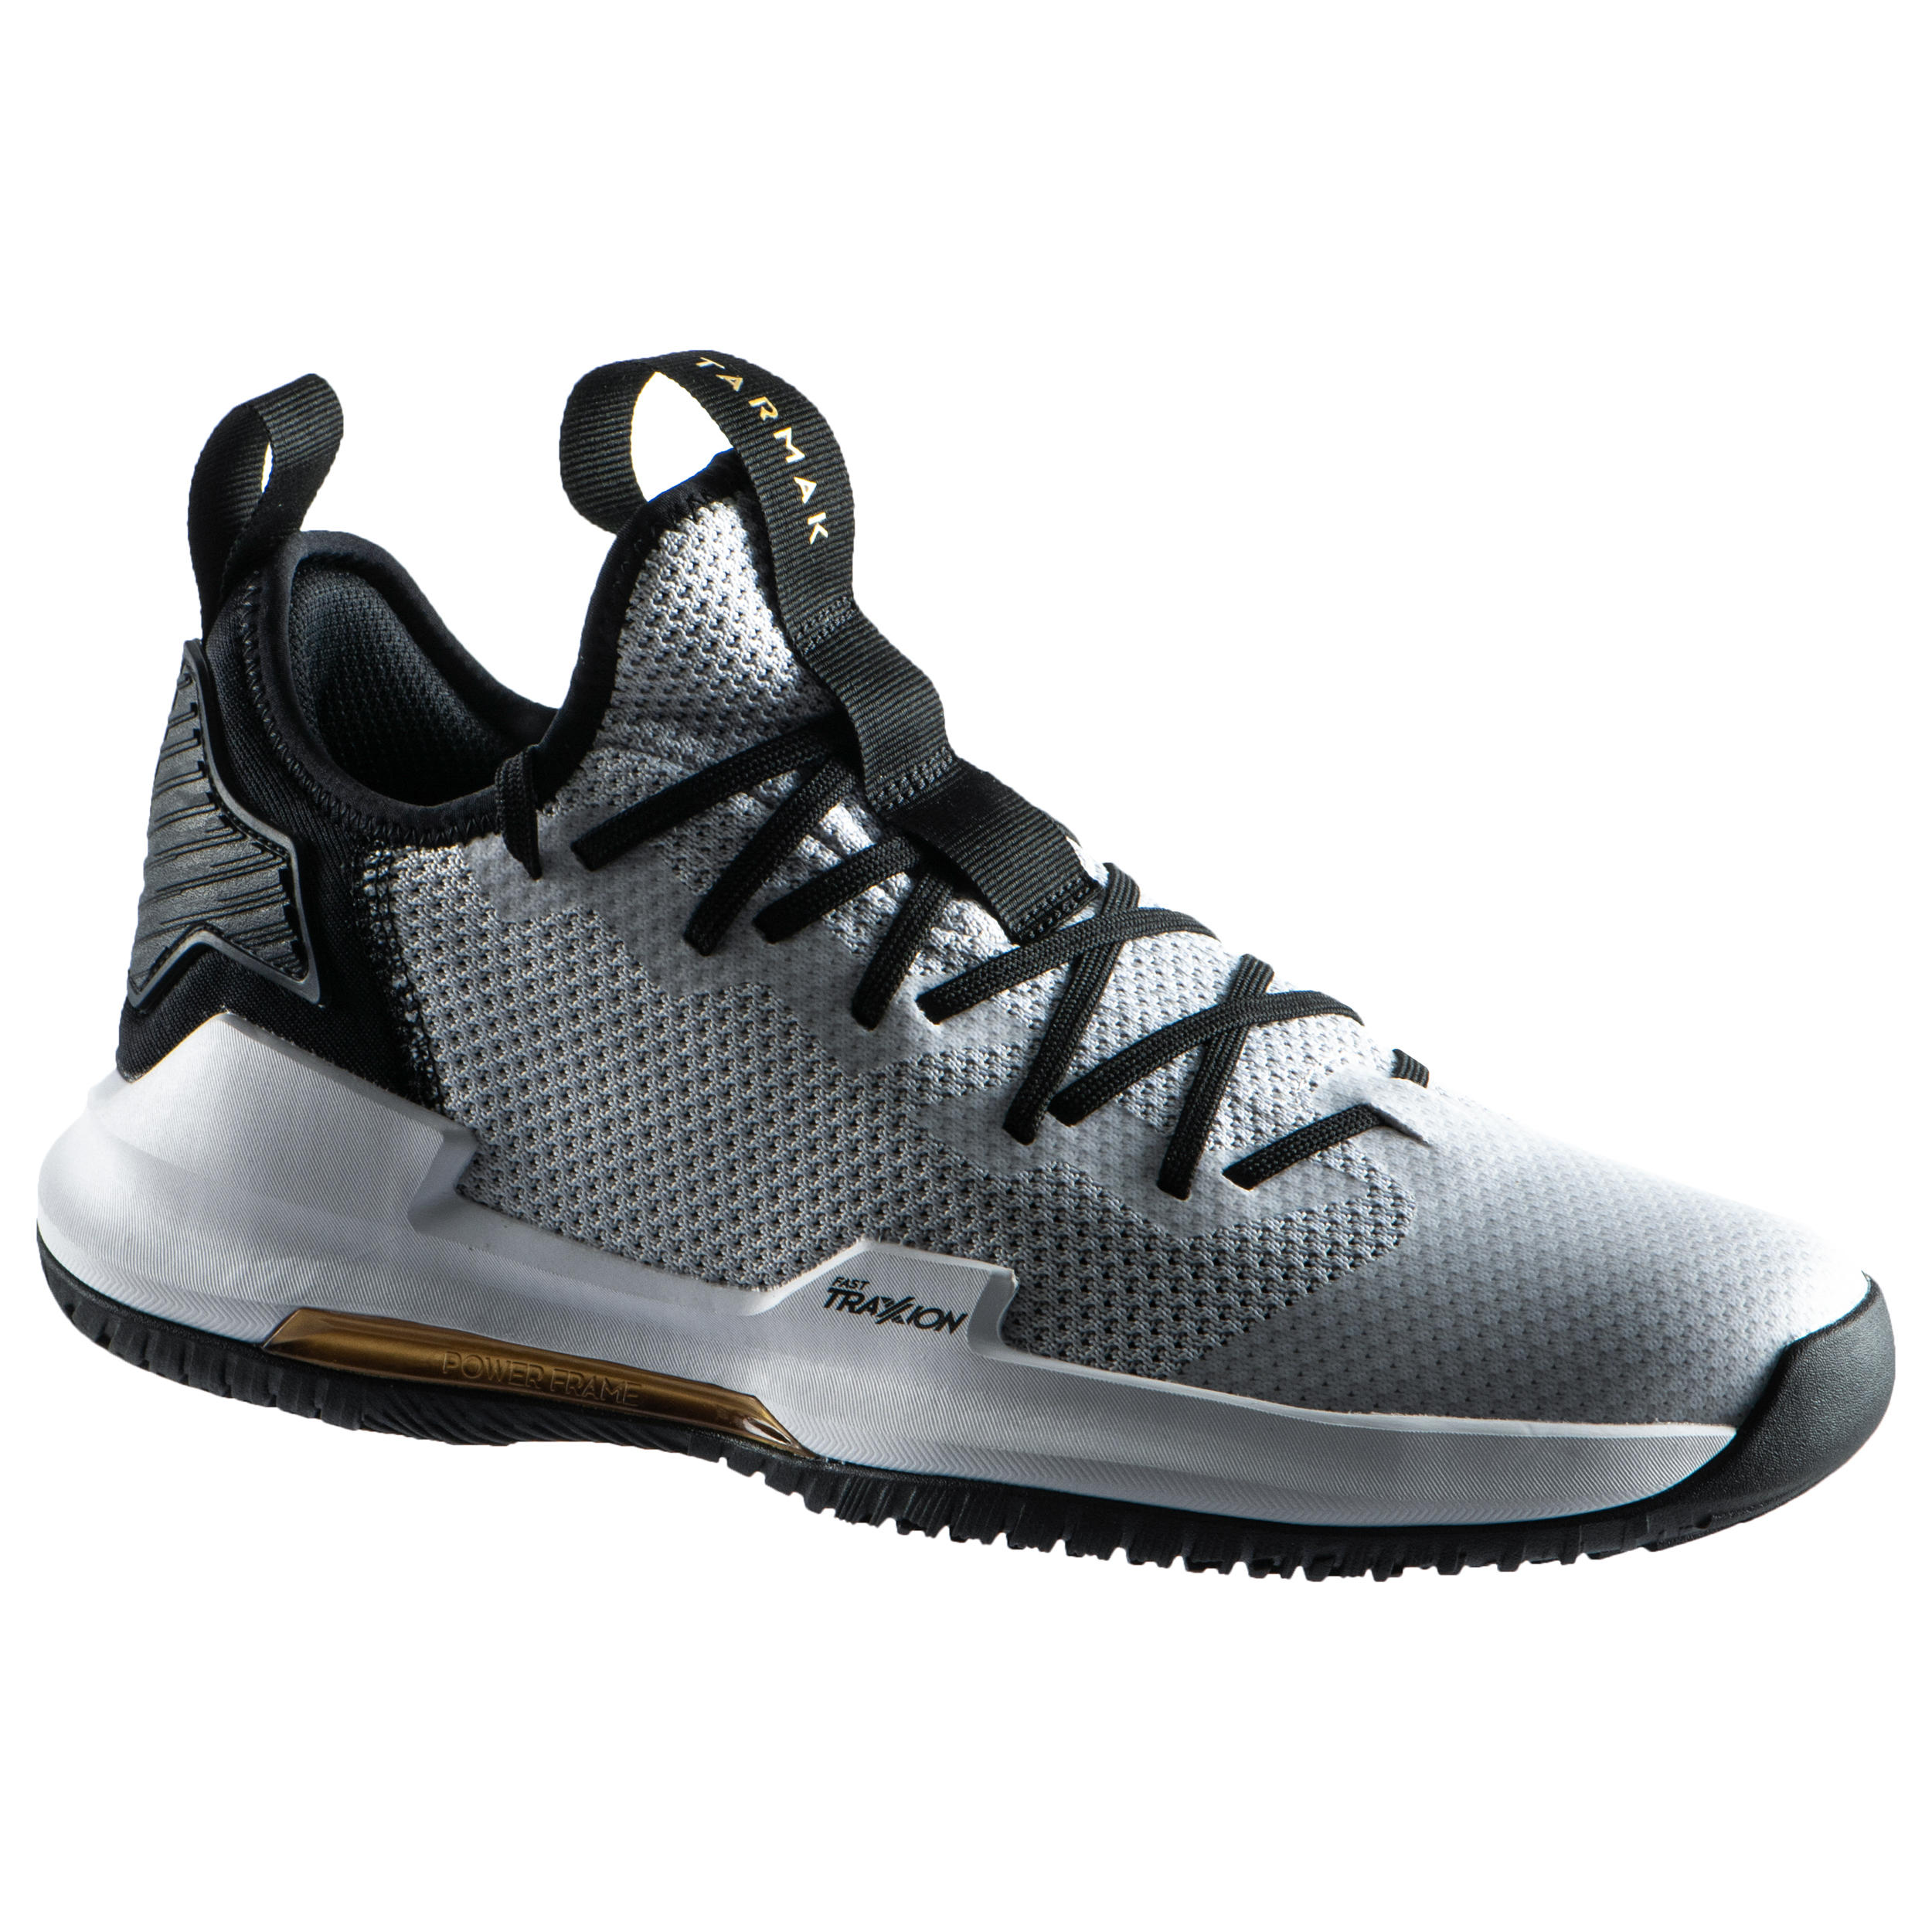 Men's Low-Rise Basketball Shoes Fast 